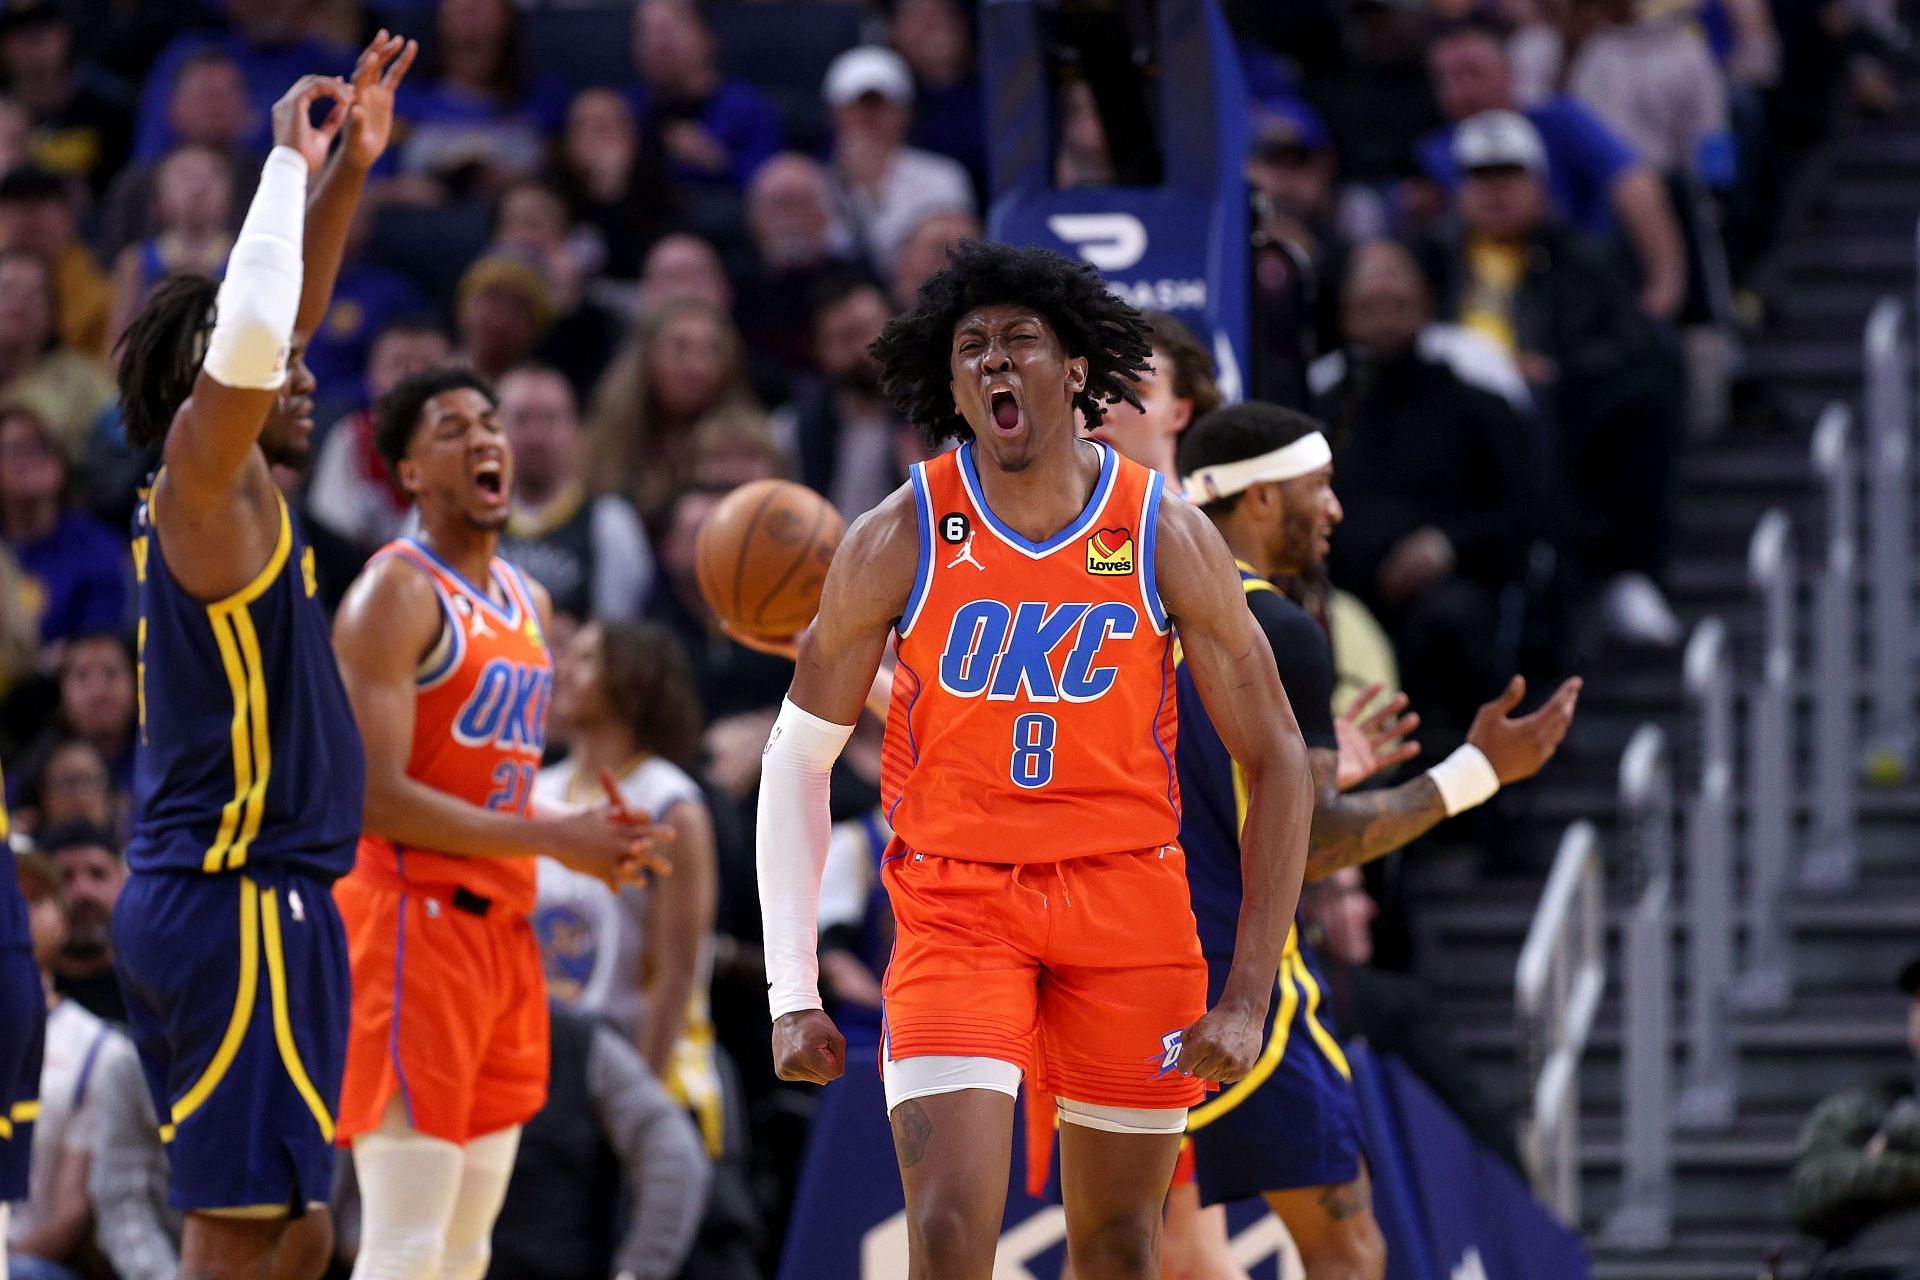 OKC Thunder's future draft picks: How is the team positioned for future